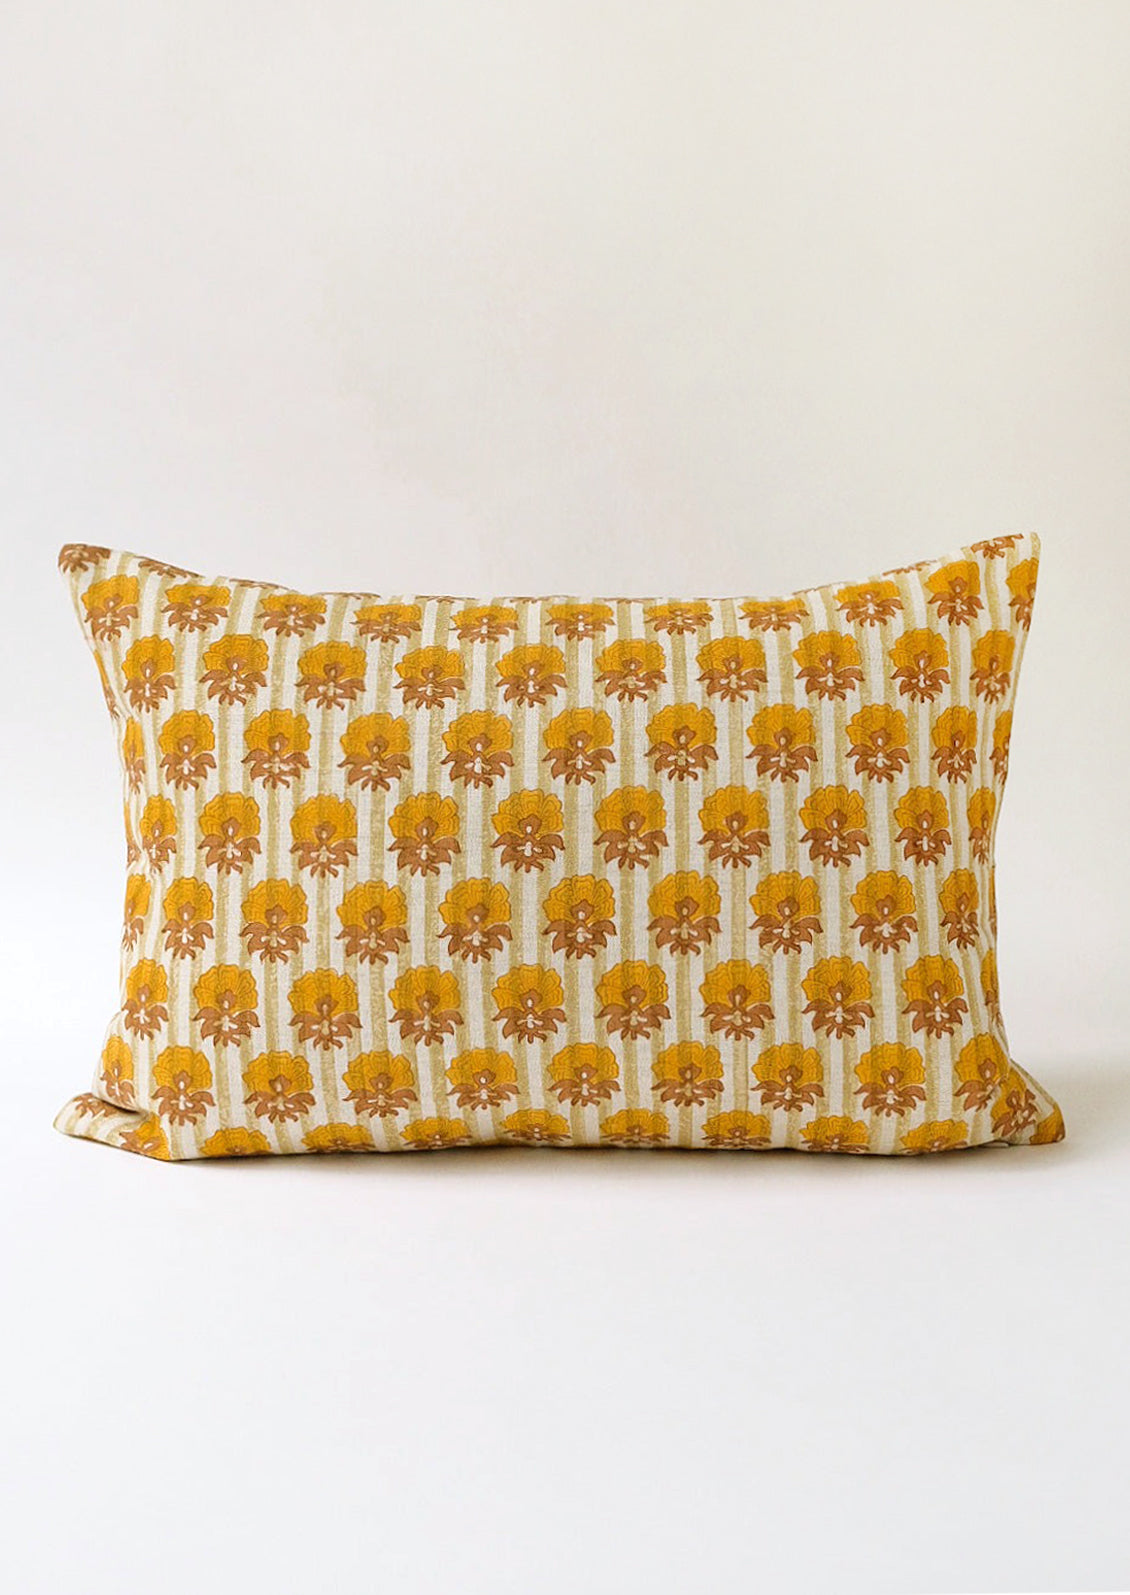 A striped block print pillow with floral print.